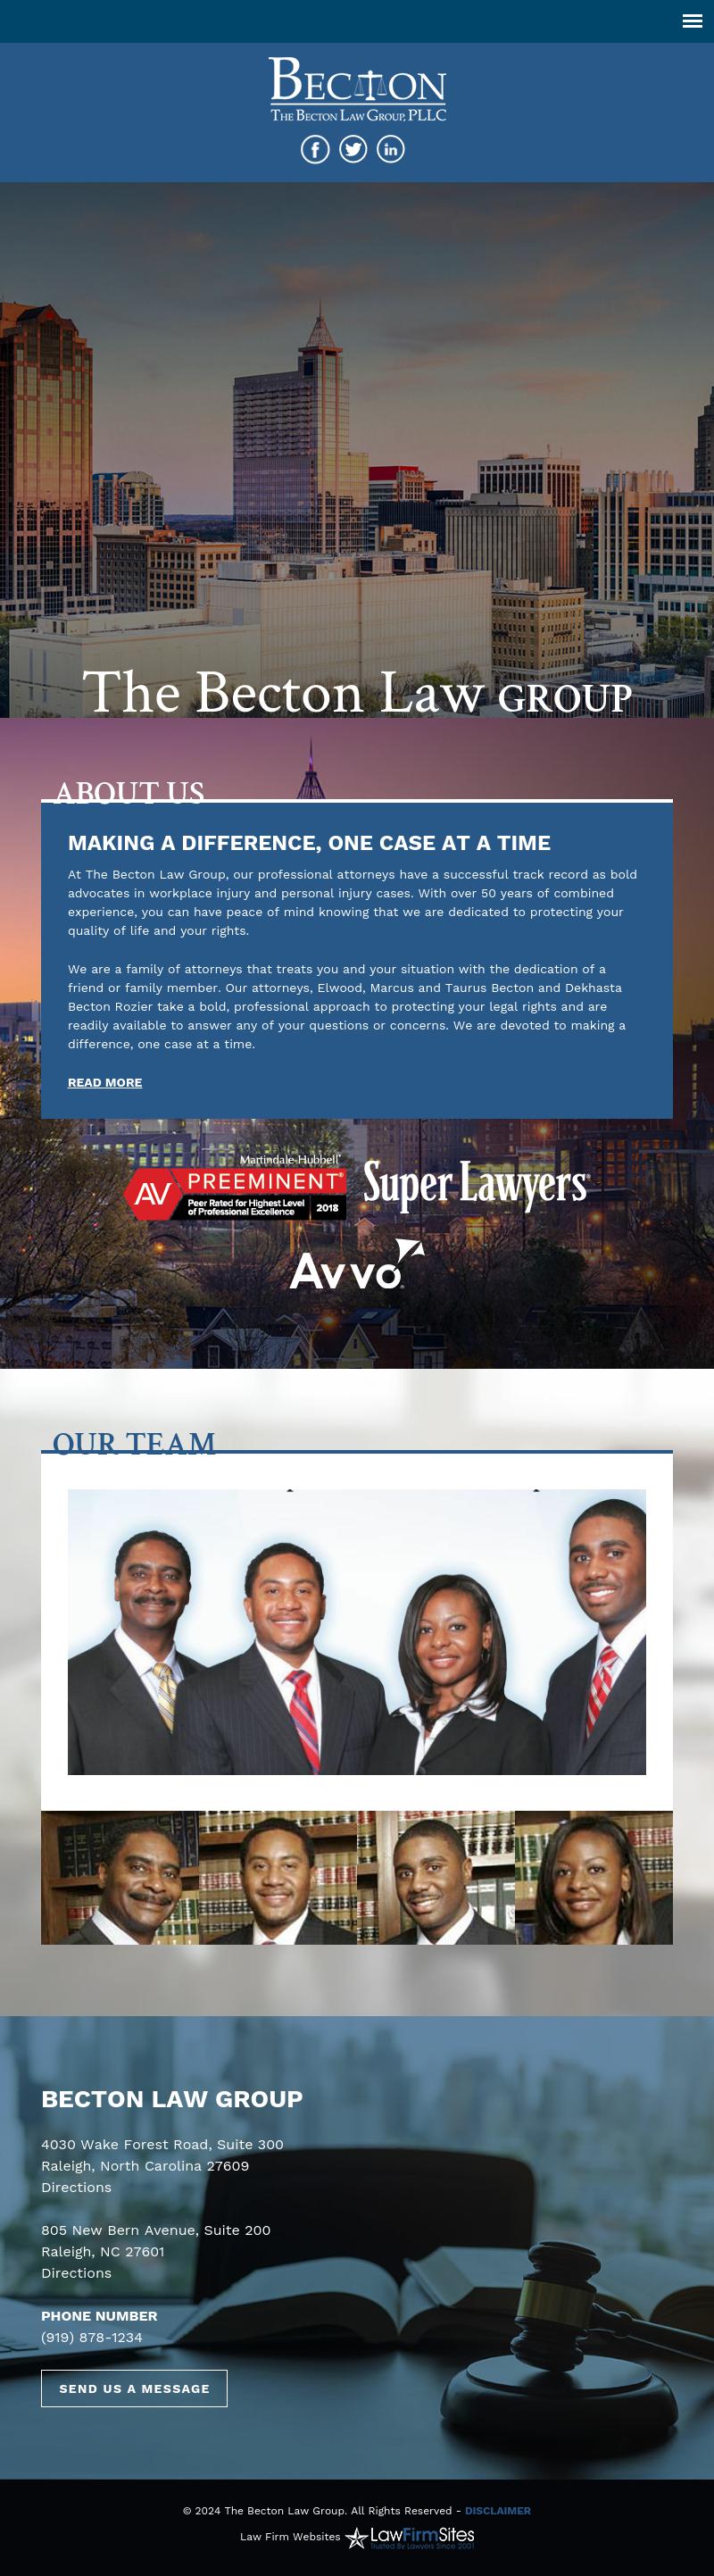 The Becton Law Group - Raleigh NC Lawyers